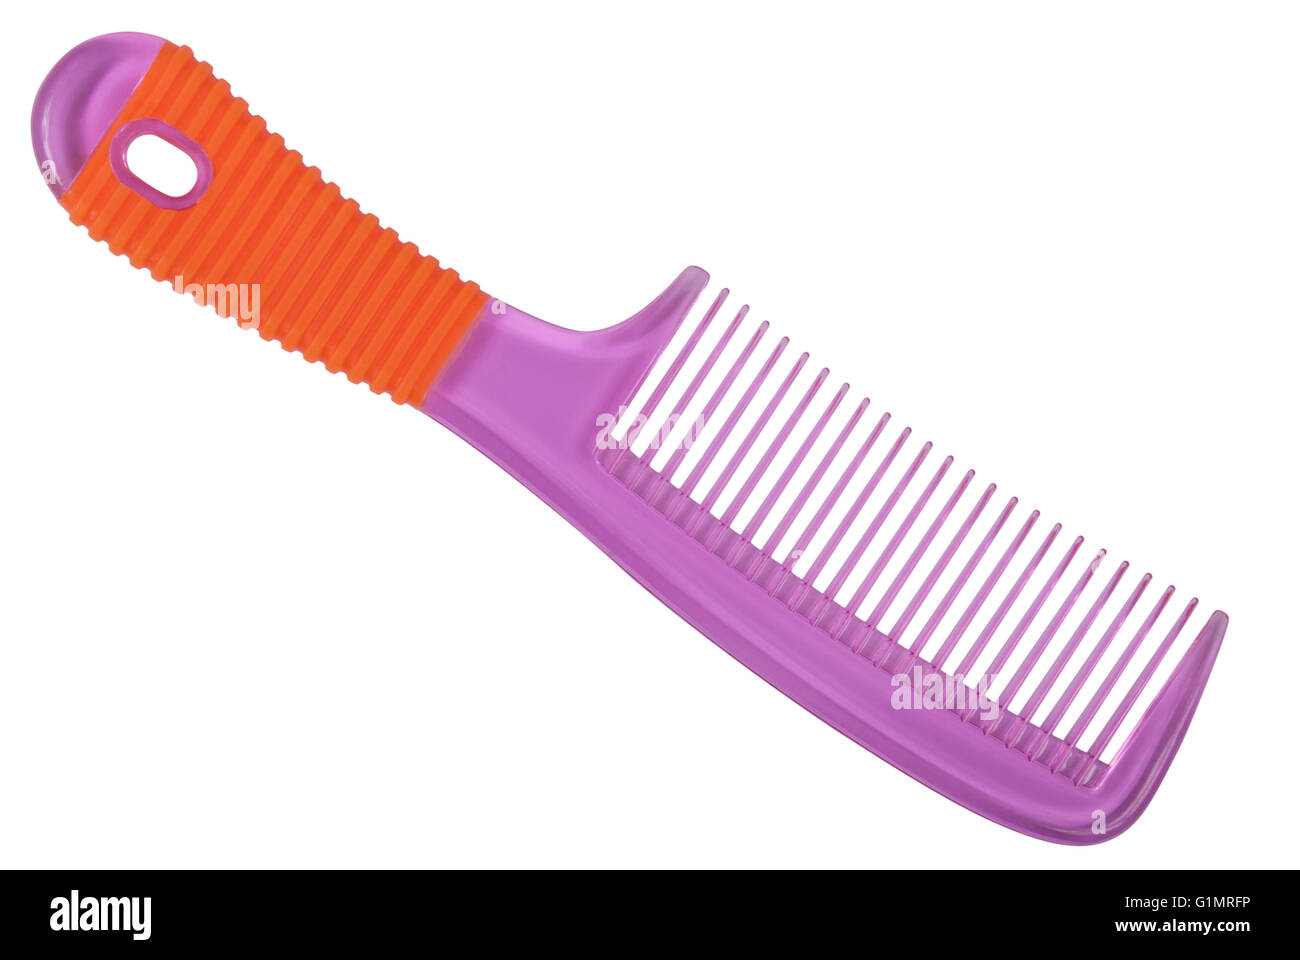 Hair brush. Plastic, pink. Isolated on white. Clipping path included. Stock Photo